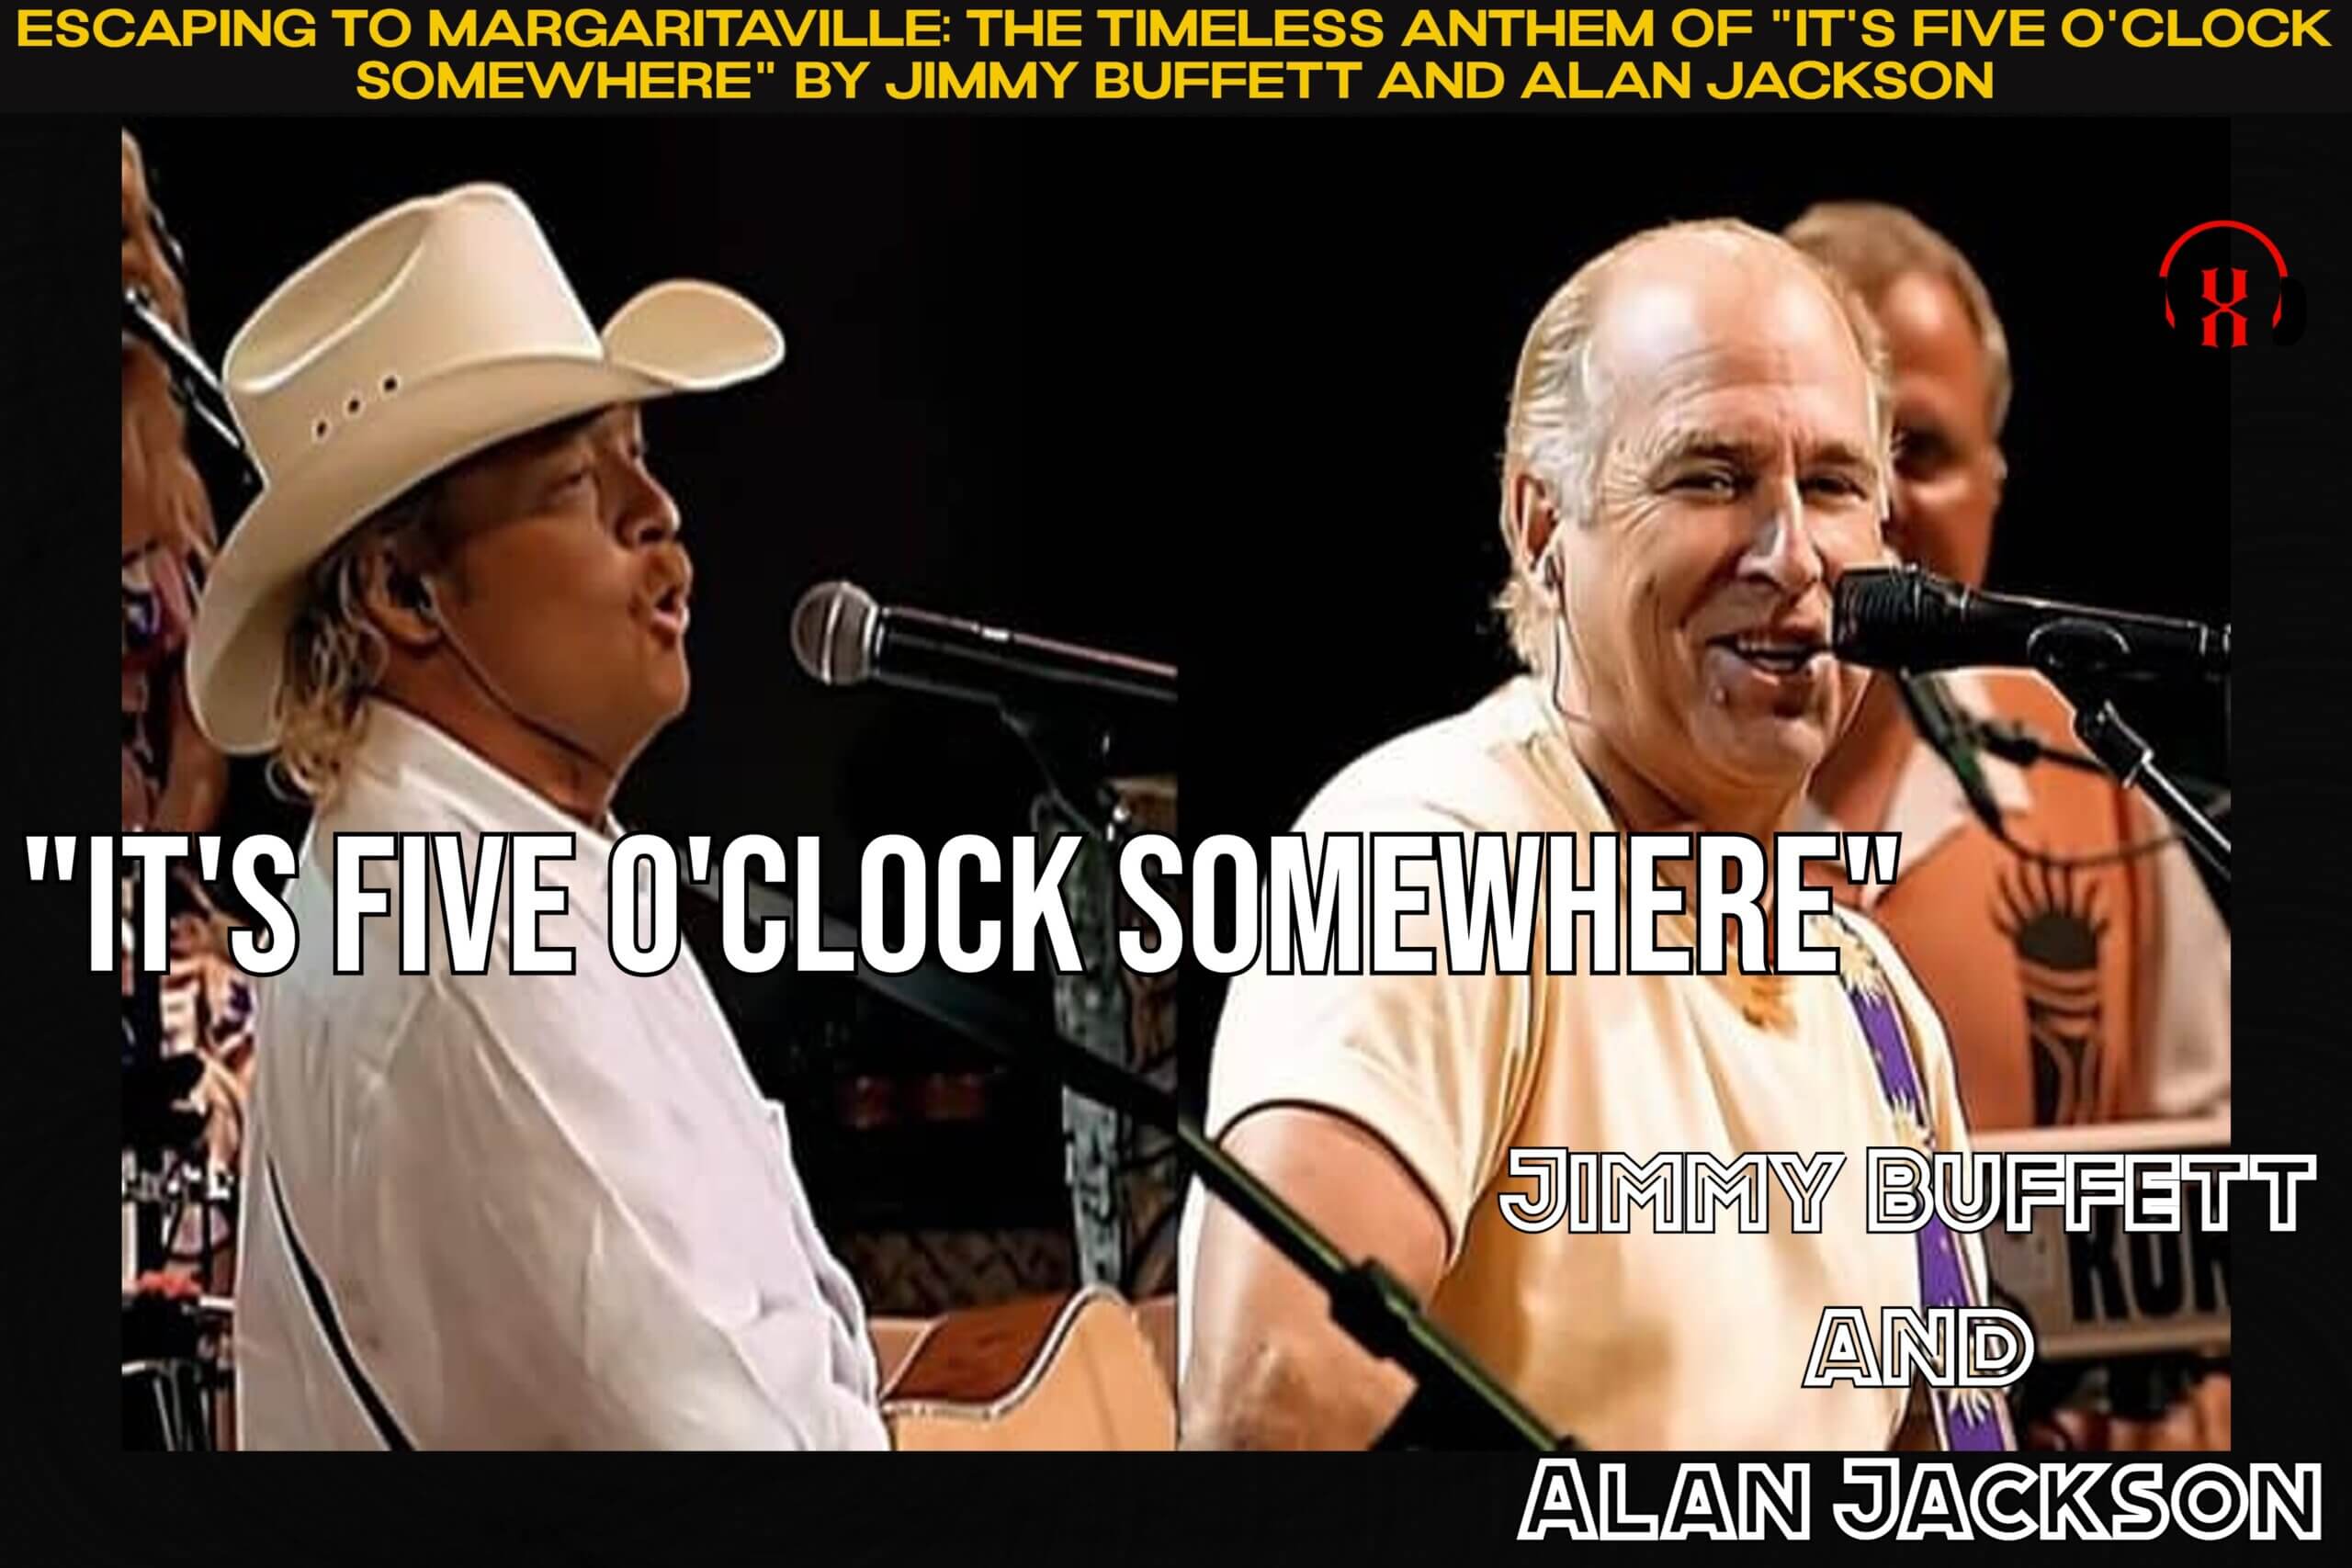 Escaping to Margaritaville: The Timeless Anthem of "It's Five O'Clock Somewhere" by Jimmy Buffett and Alan Jackson